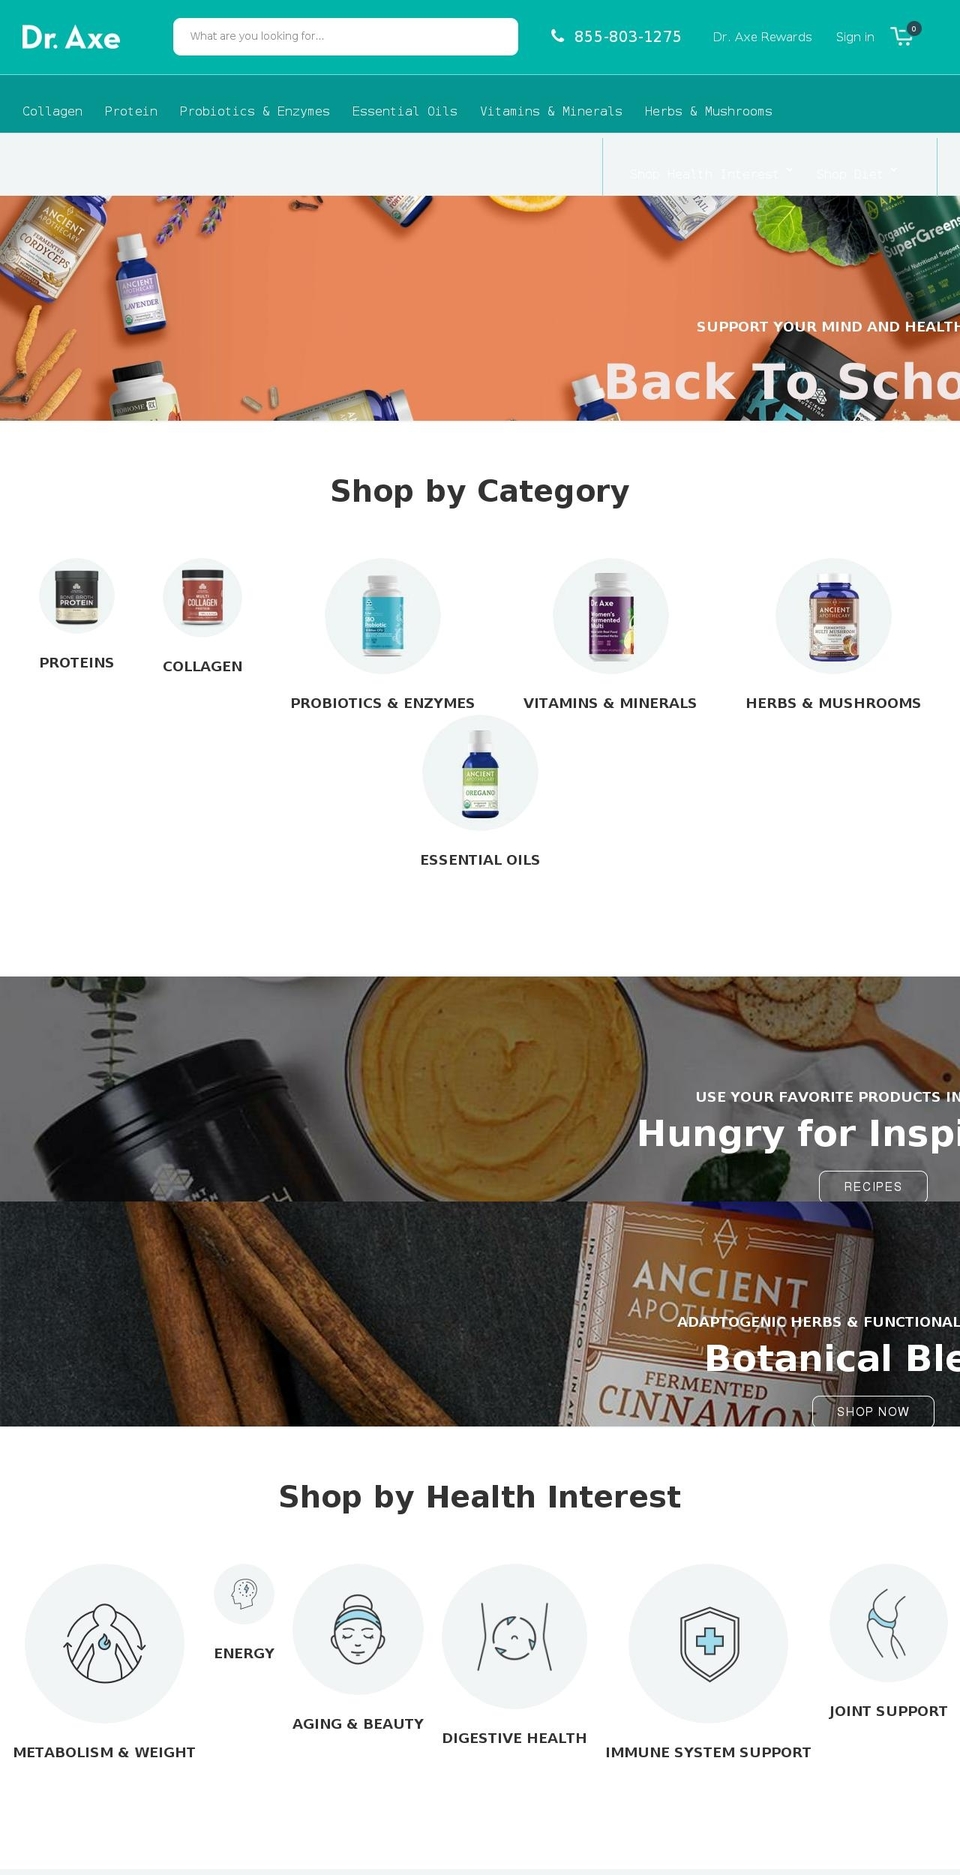 10571147 | Hotfix Cart Styles for Rewards | 8-8-18 Shopify theme site example realfooddietcookbook.com